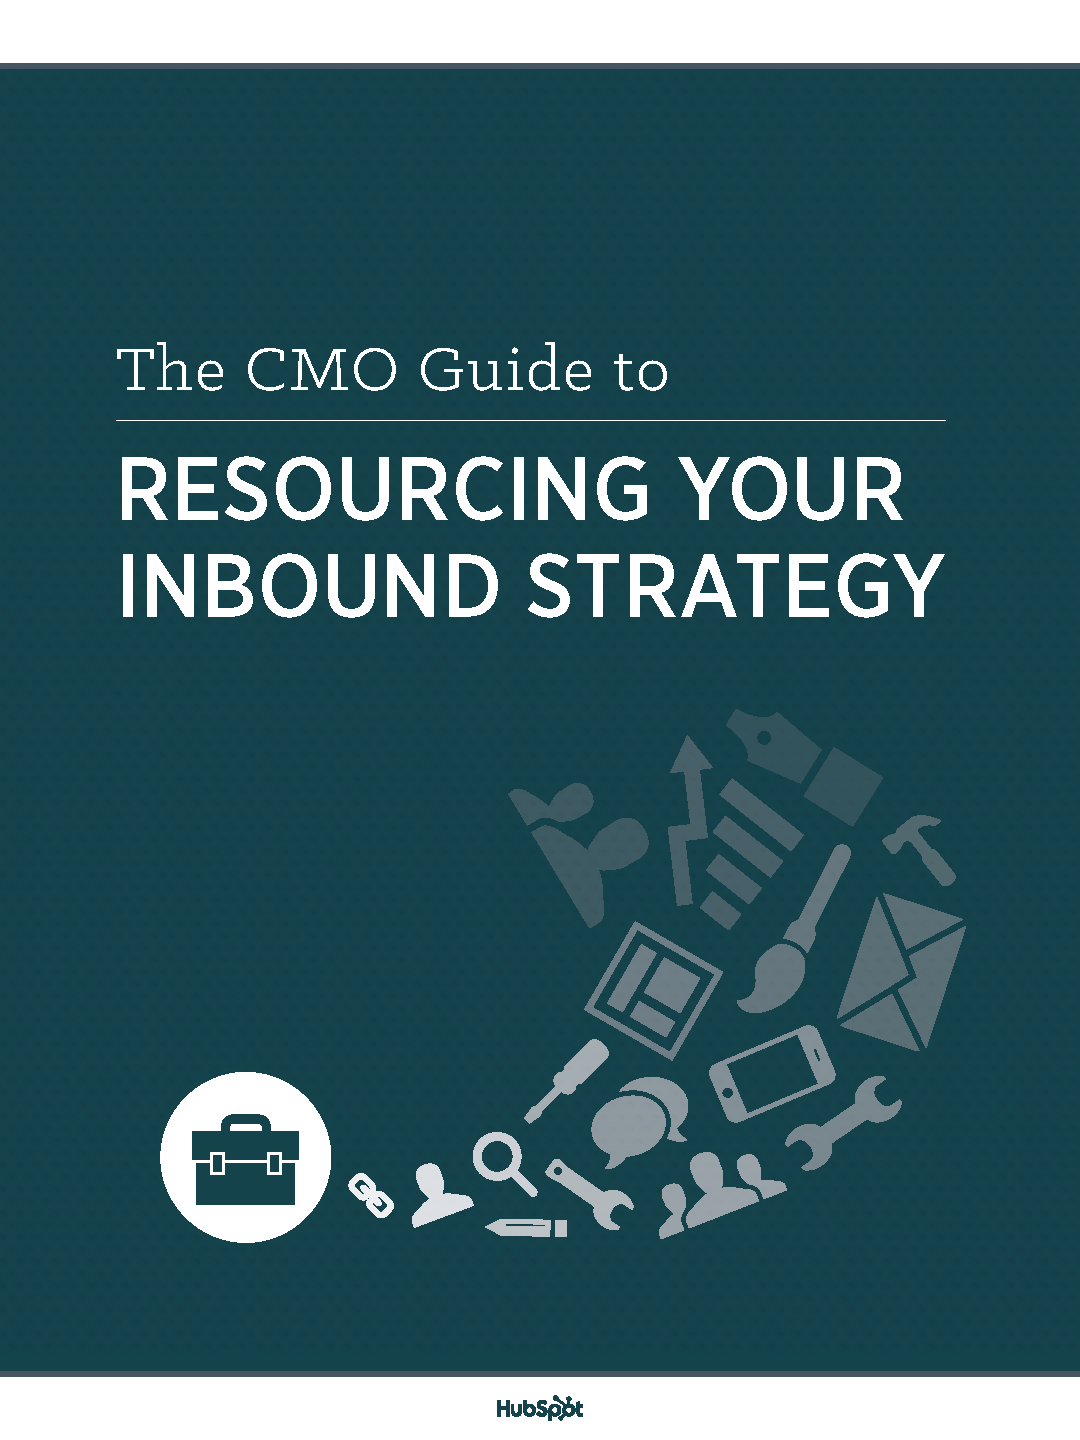 inbound-strategy-coverflat.png